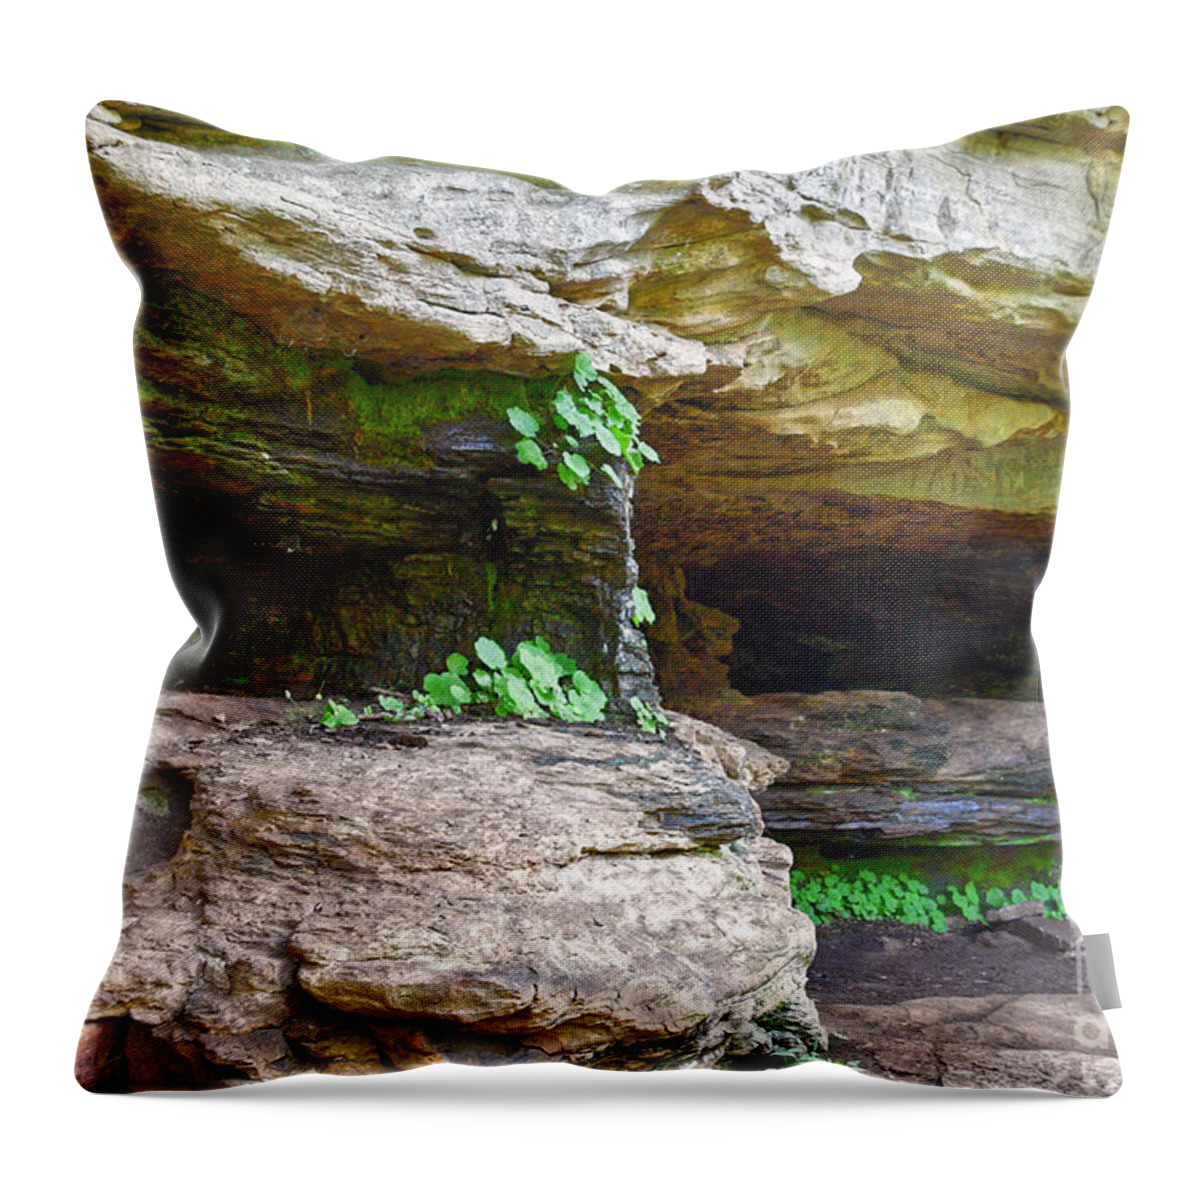 Tennessee Throw Pillow featuring the photograph Caves In A Cliff by Phil Perkins